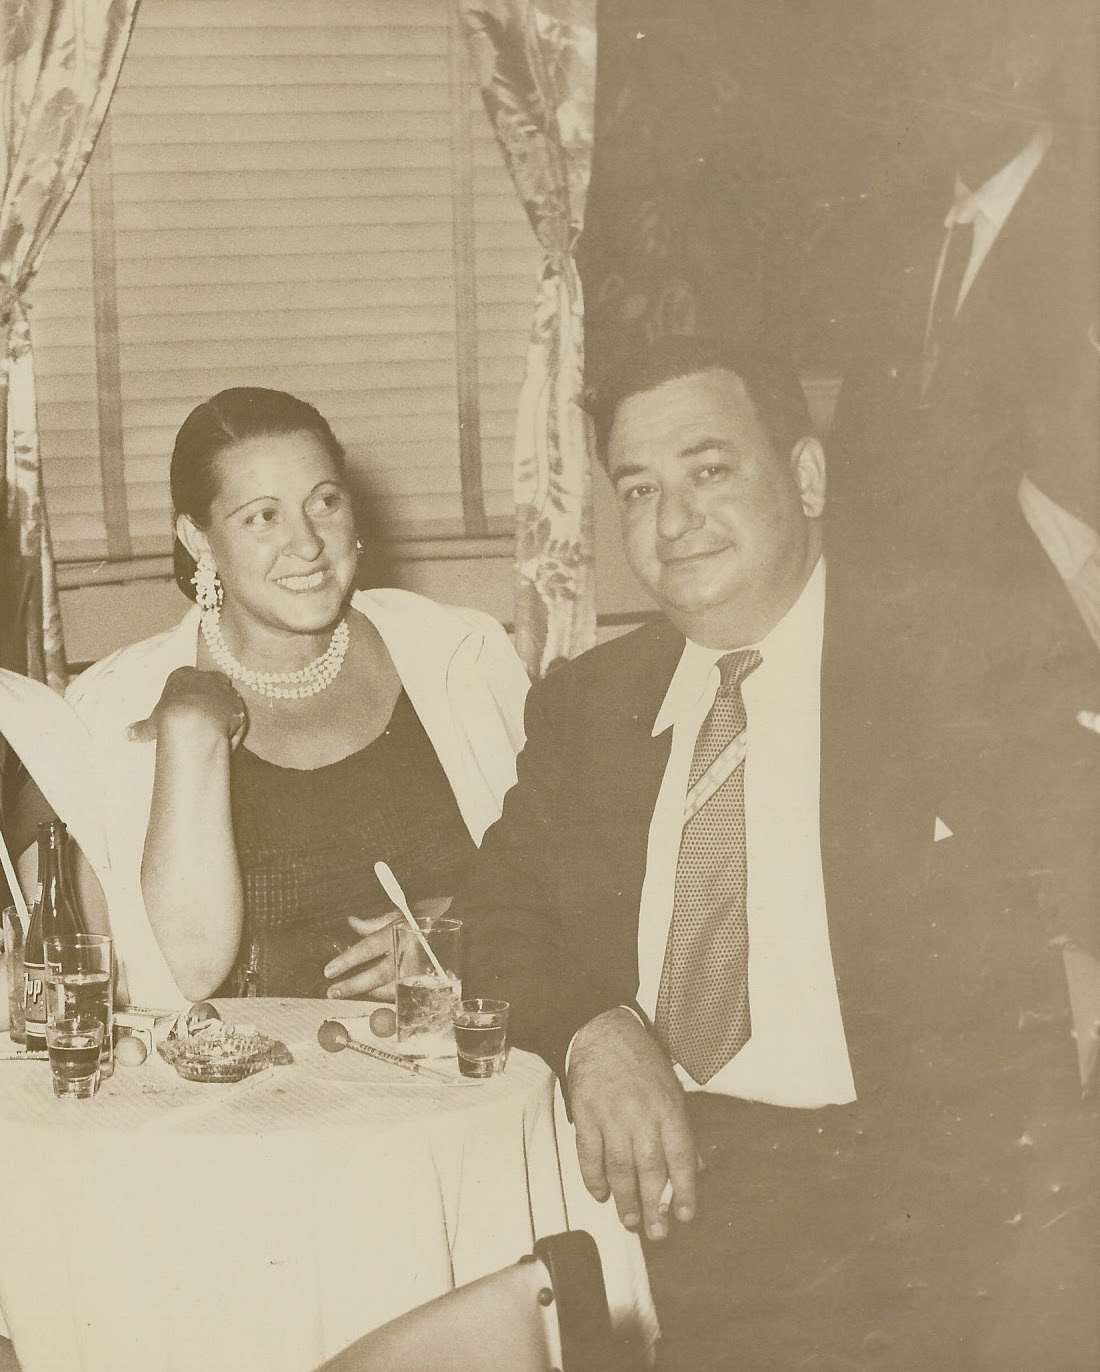 The author's grandfather Russ Shorto and his wife Mary, circa 1955, in Atlantic City. (Courtesy of Russell Shorto)